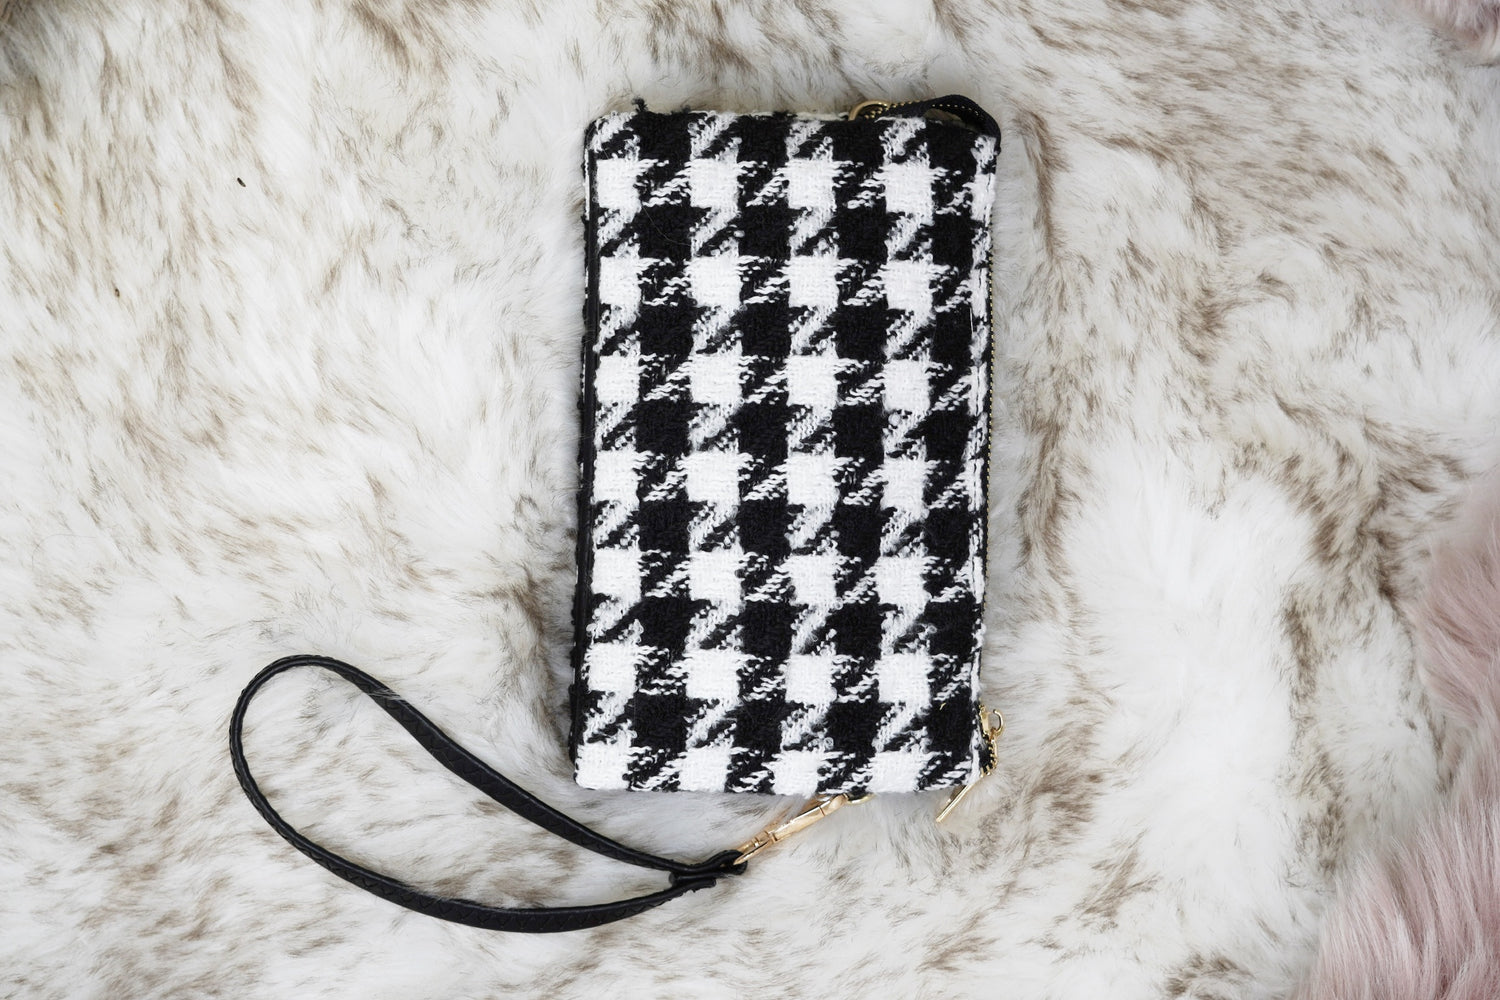 Riley Patterned Crossbody Wallet 5 Compartments 6 Card Slots  1 Interior Zipper  Zipper Closer  Colors:  Black/White Houndstooth One Crossbody Strap, One Wristlet Strap - Both Removable 8.5 x 5.5in